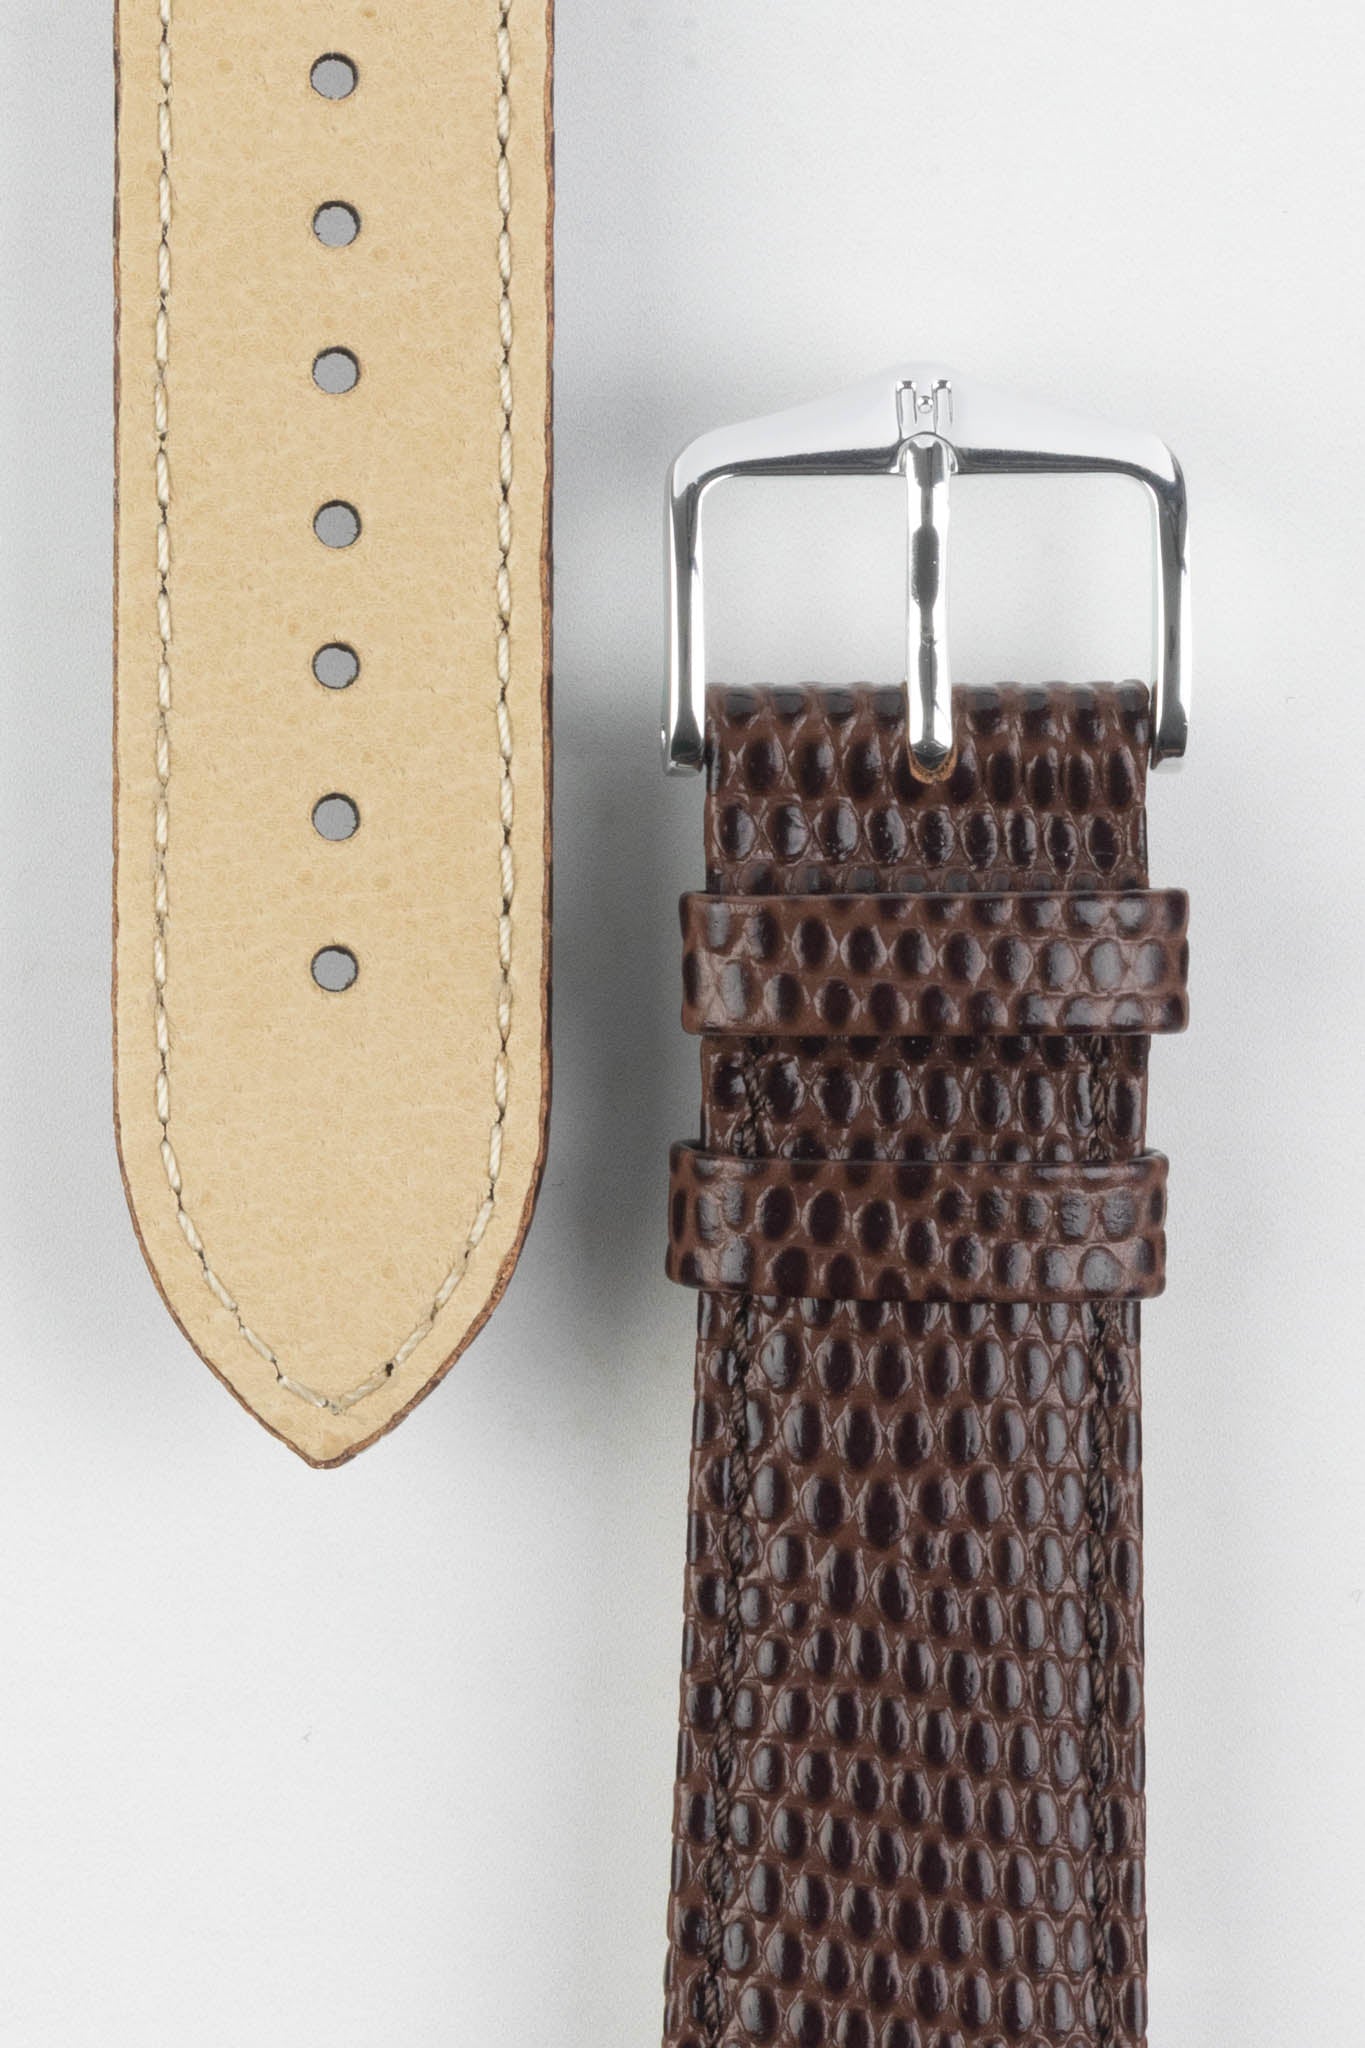 Hirsch RAINBOW Lizard Embossed Quick-Release Leather Watch Strap in BROWN